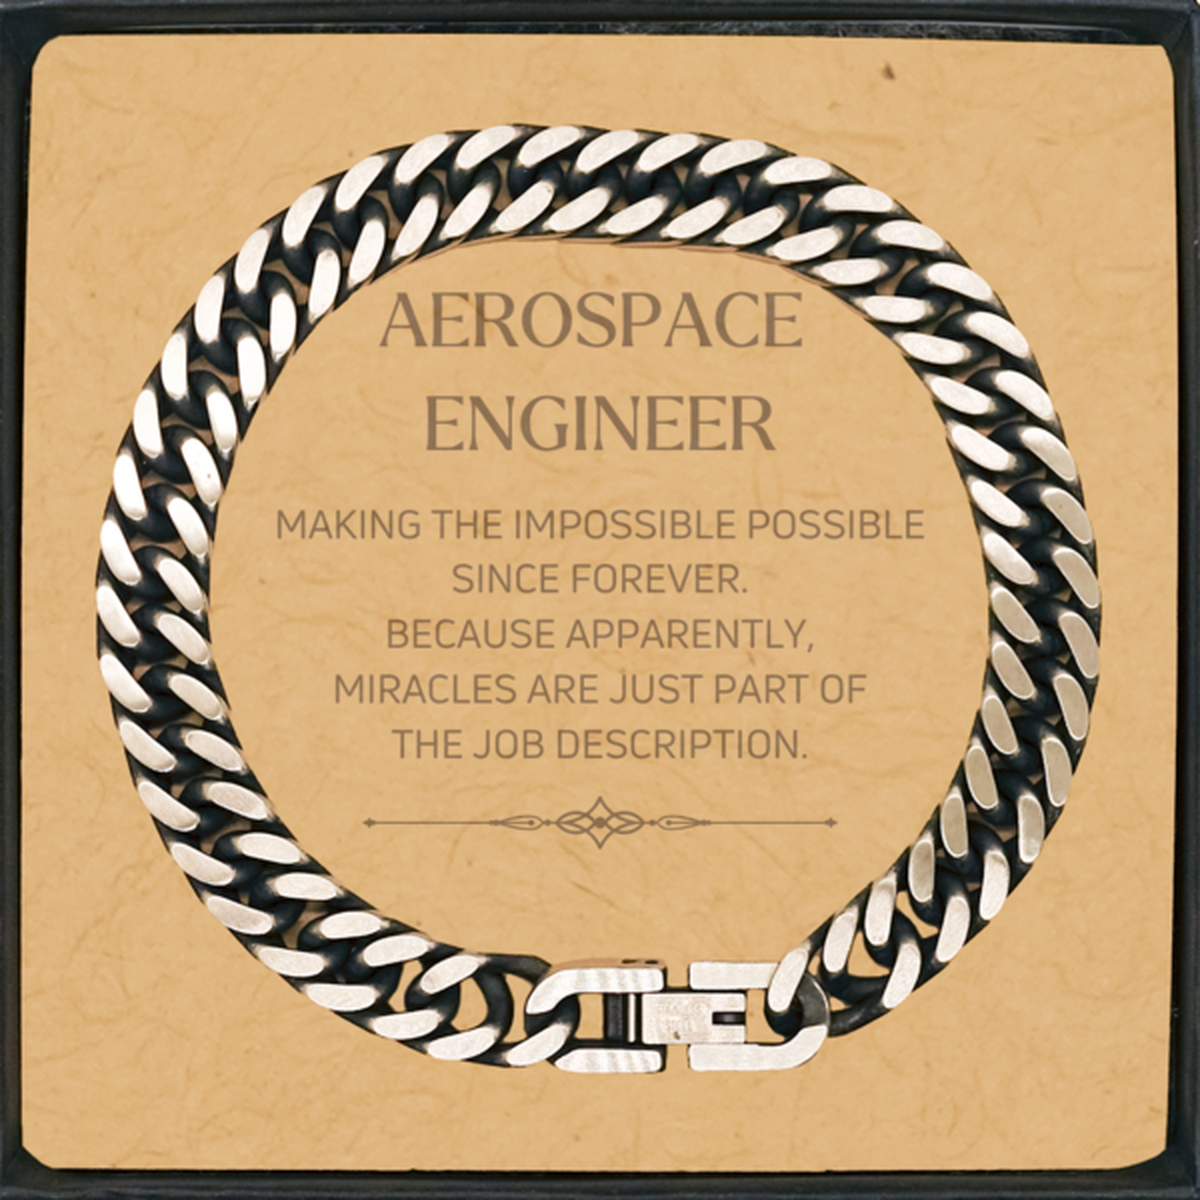 Funny Aerospace Engineer Gifts, Miracles are just part of the job description, Inspirational Birthday Cuban Link Chain Bracelet For Aerospace Engineer, Men, Women, Coworkers, Friends, Boss